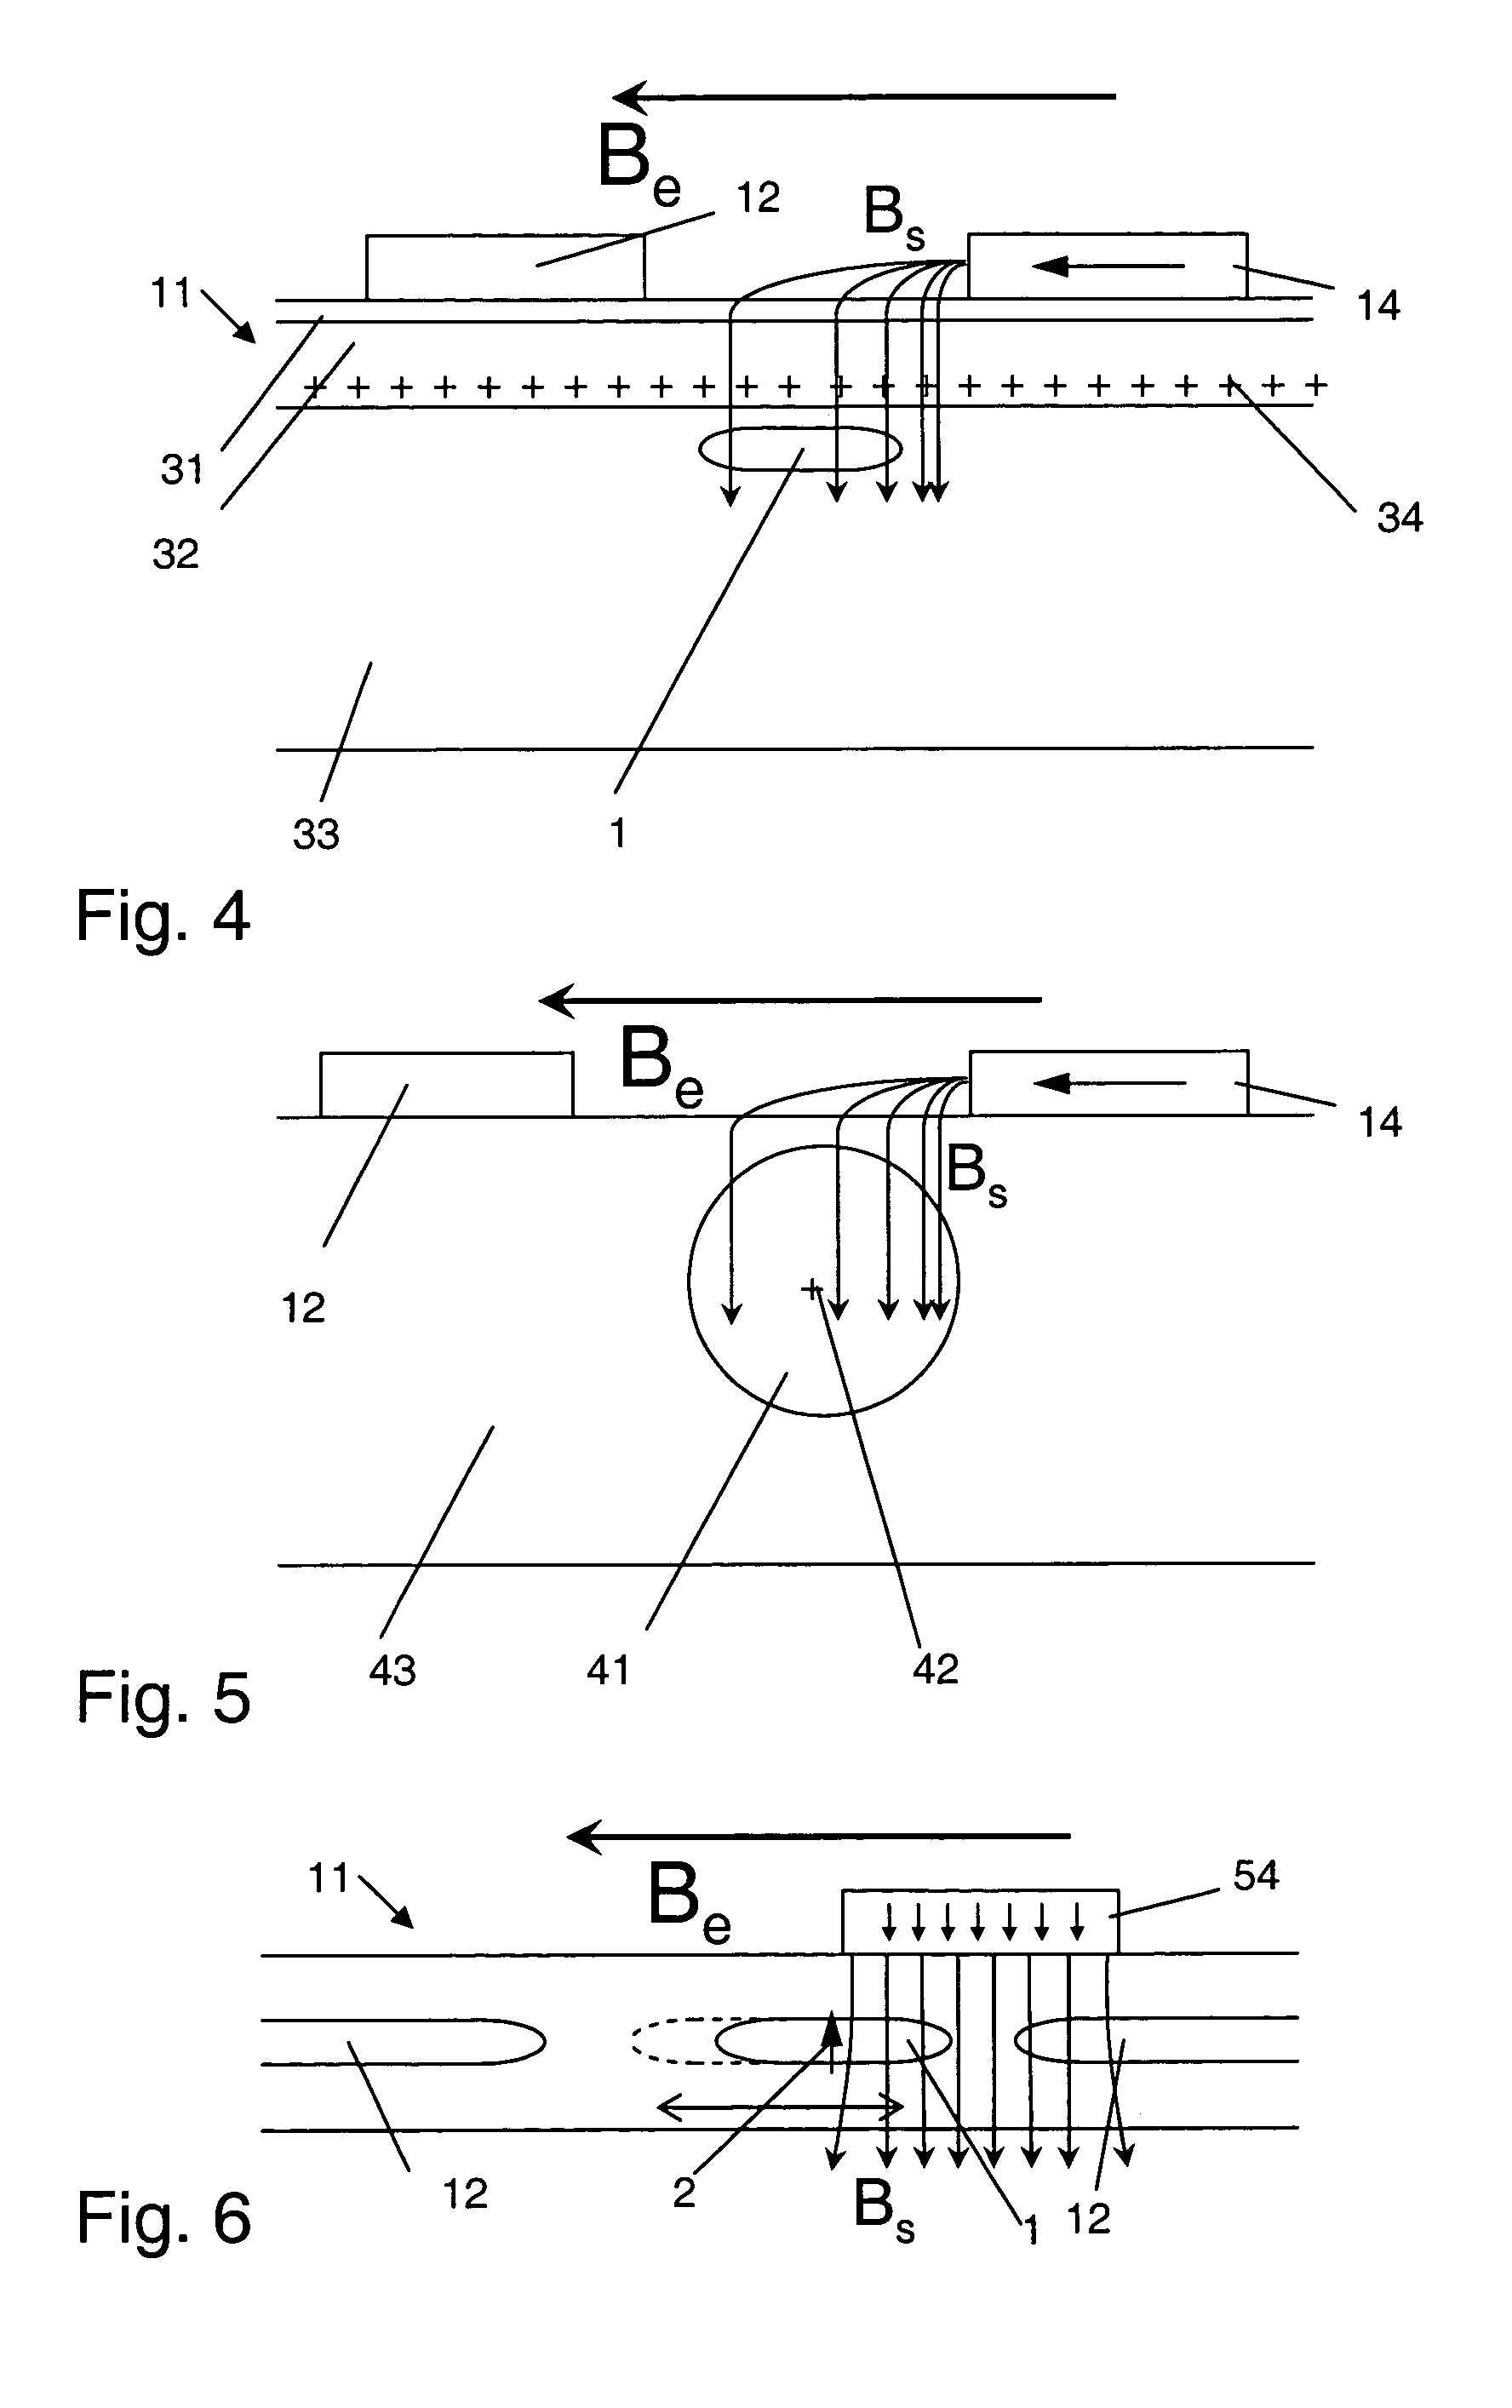 Method of manipulating a quantum system comprising a magnetic moment